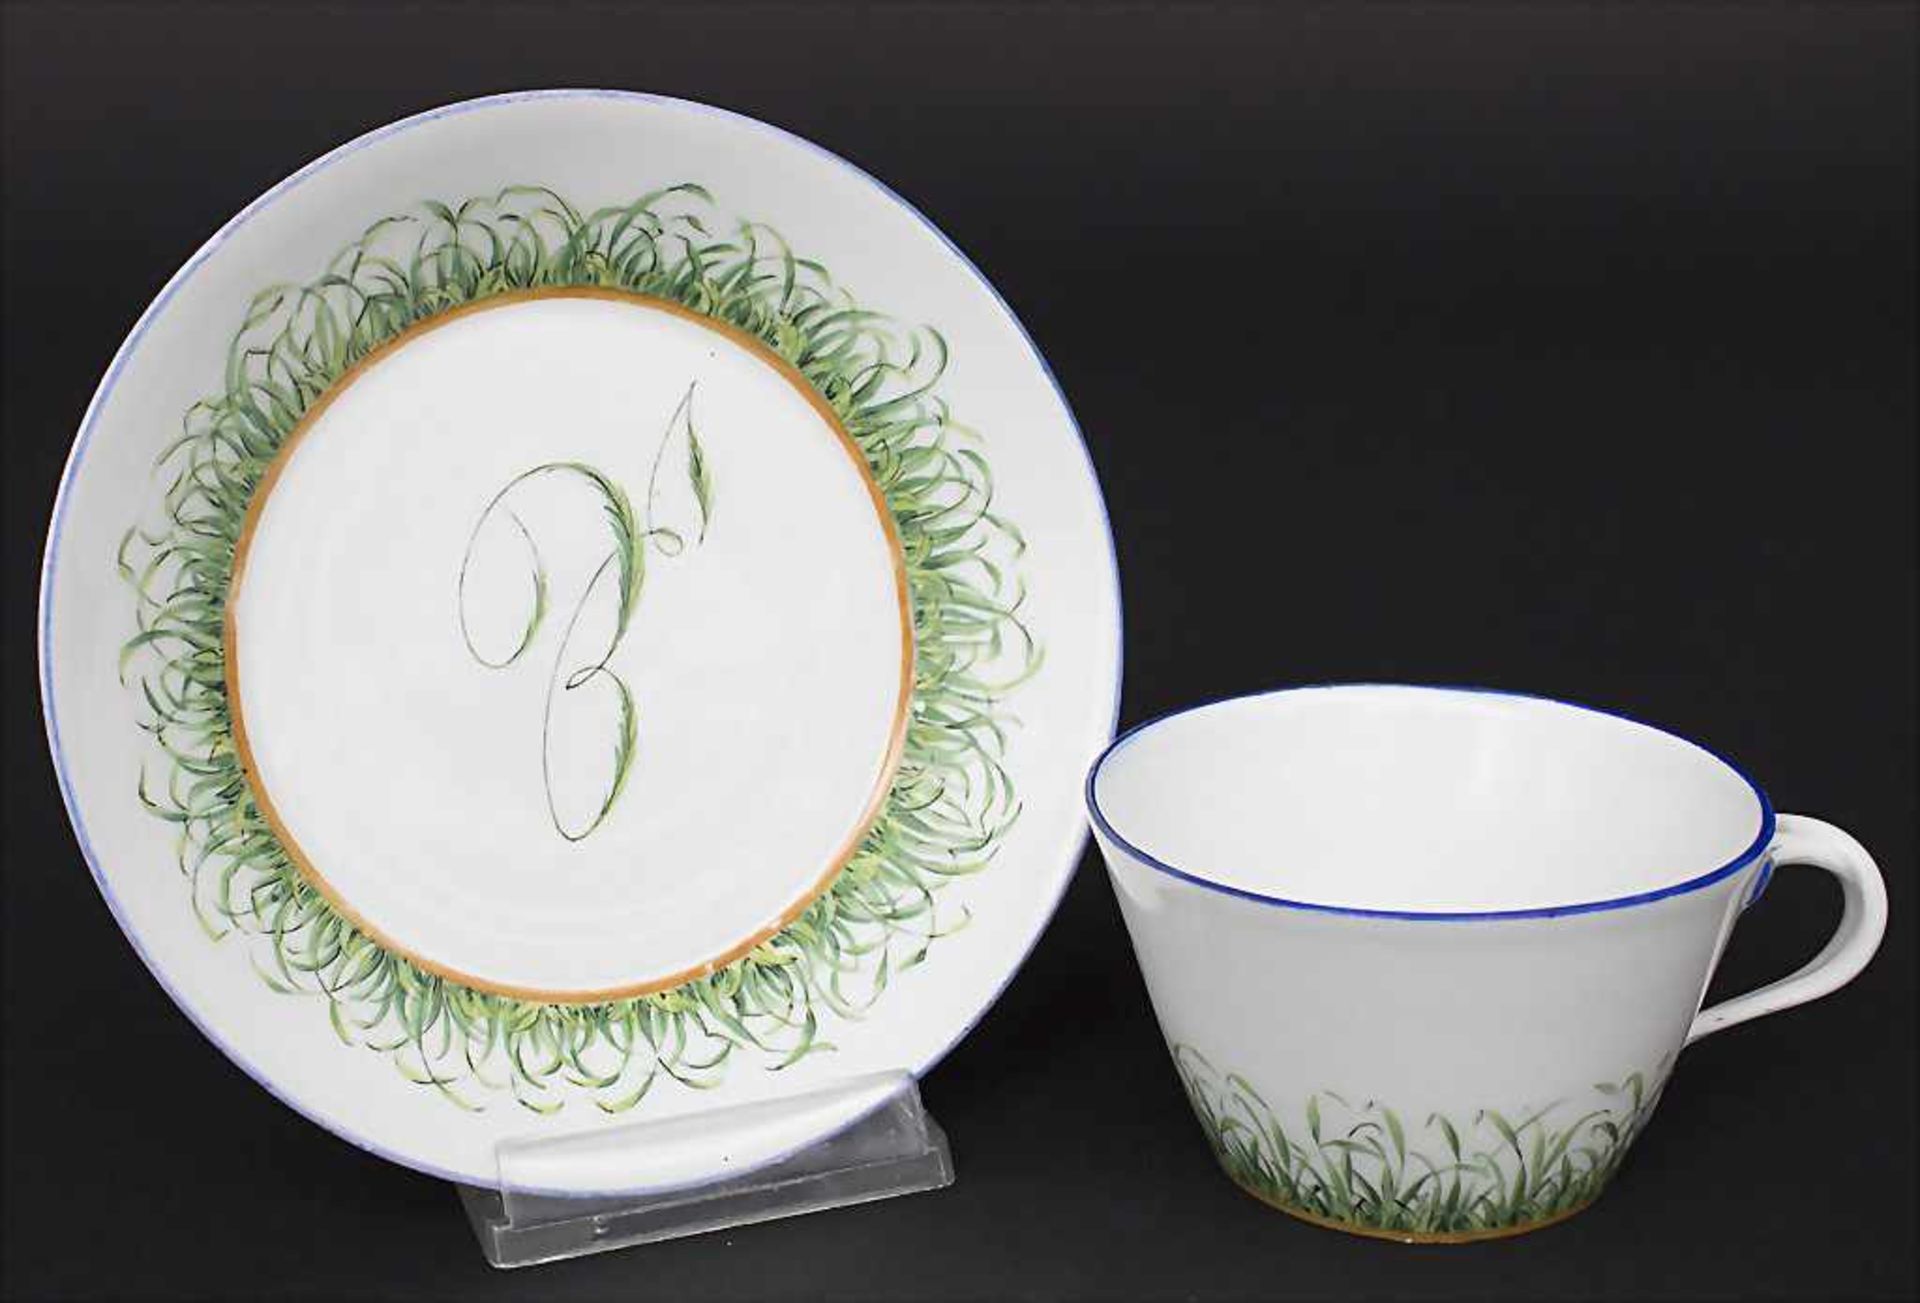 Tasse und UT mit Monogramm / A cup with saucer with monogram, Meissen, Anfang 19. Jh.Material: